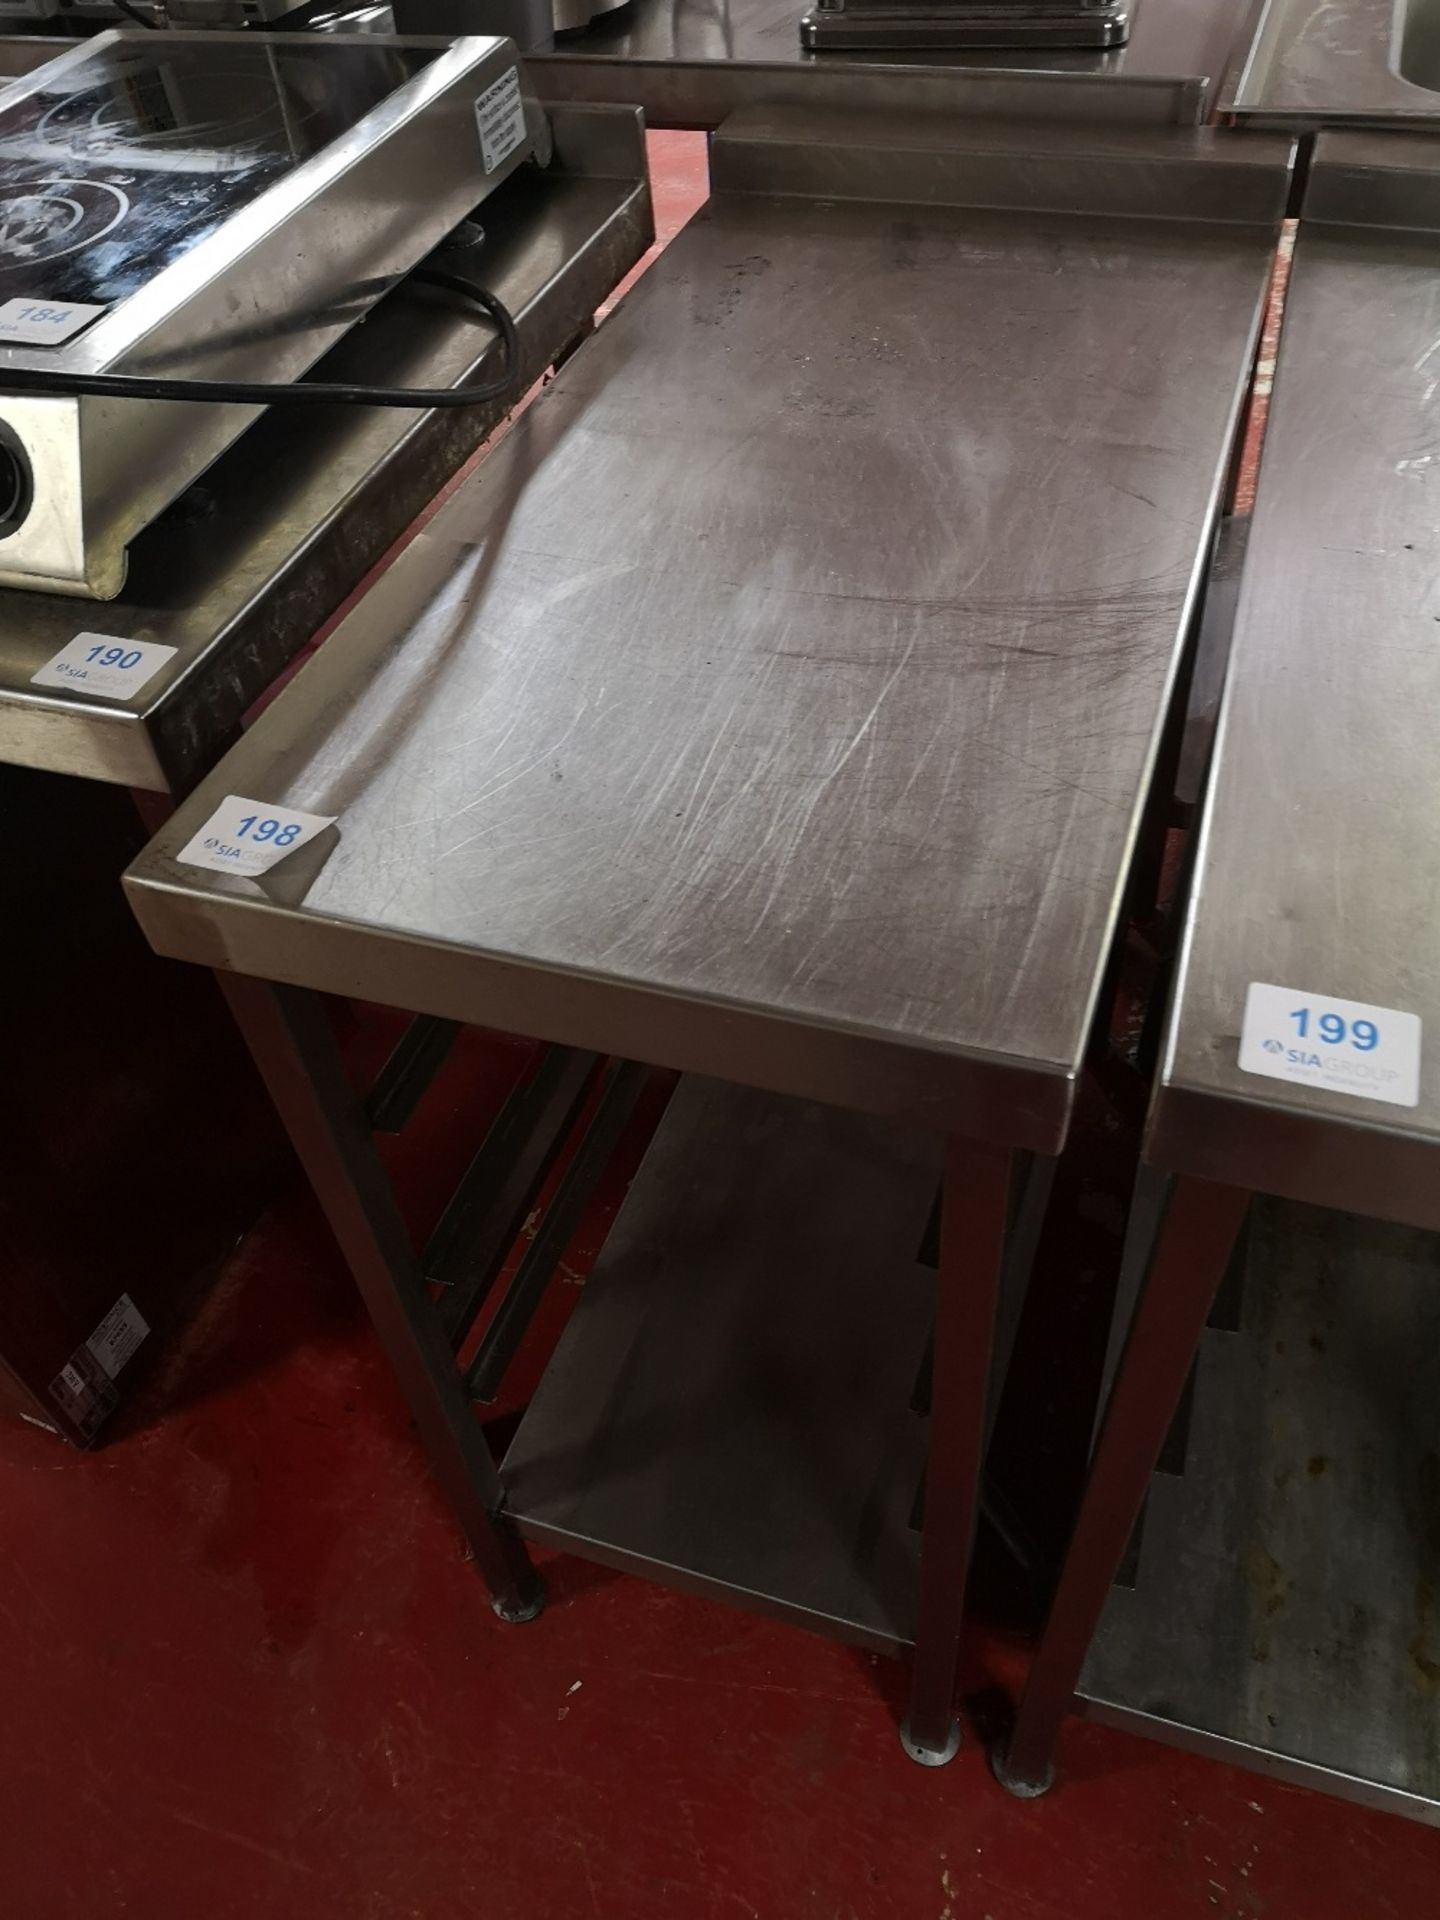 Stainless Steel Two Tier Fill in Table - Image 2 of 3